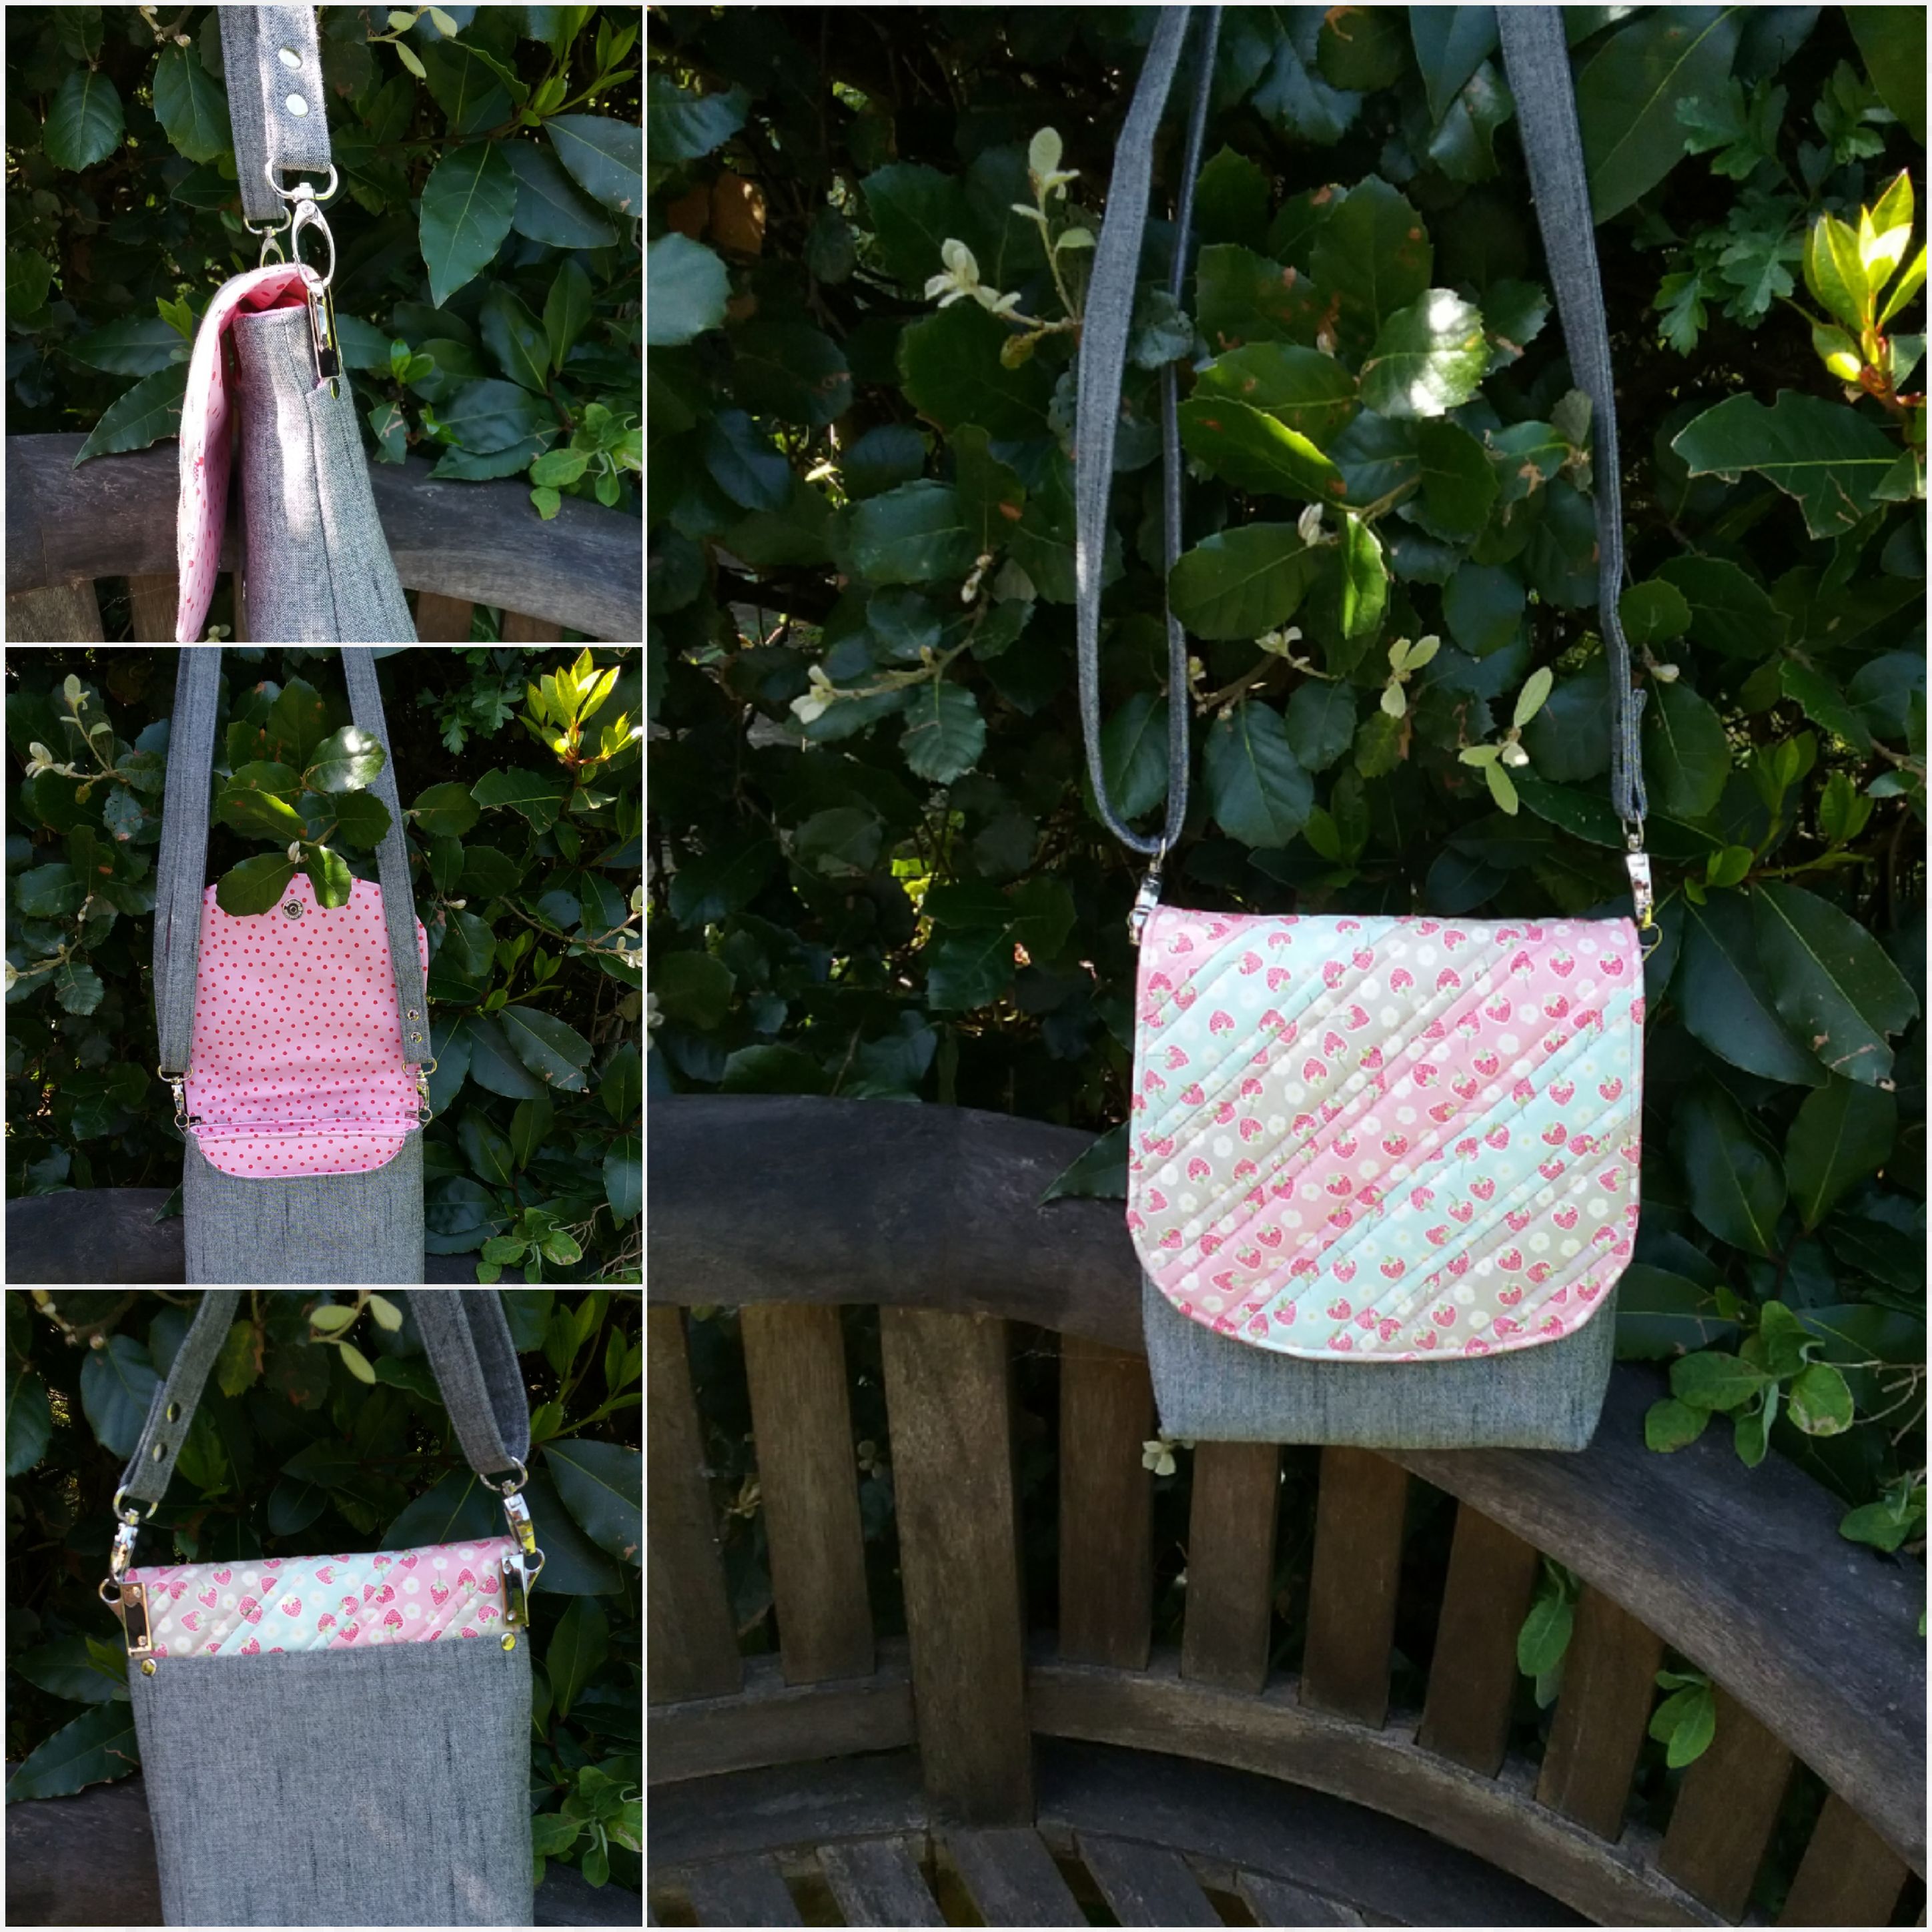 The Crossbody Bag from Sewing Patterns by Mrs H, made by LBP Bespoke Bags